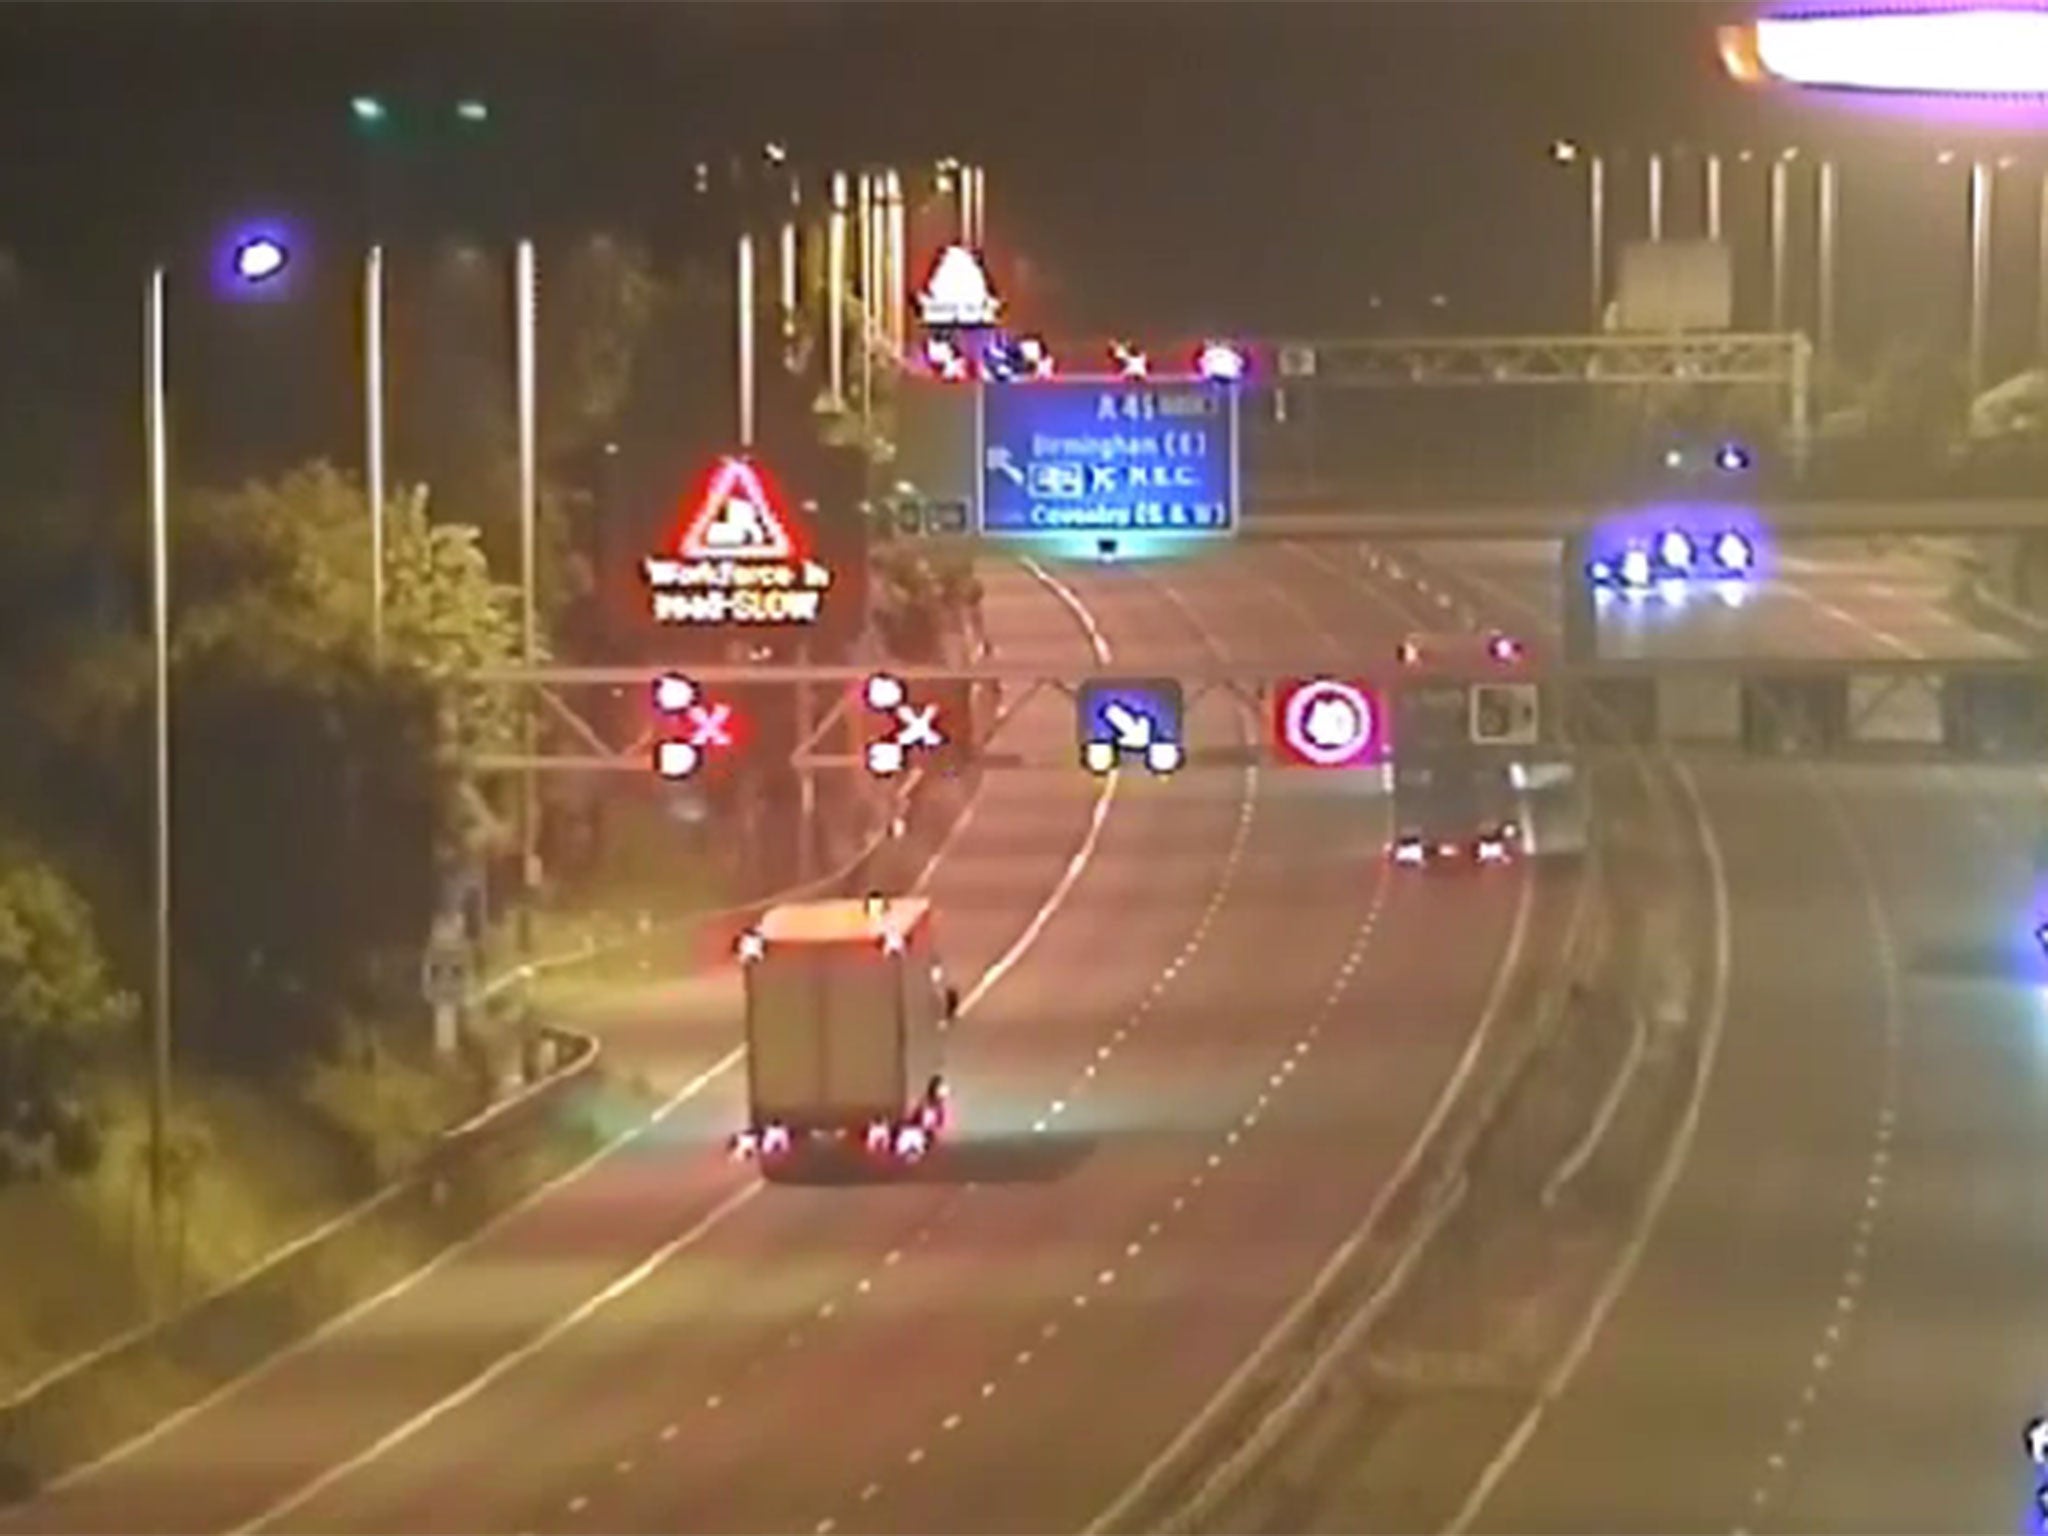 Videos released today by the Highways Agency show the risks that people working on England’s motorways and major roads face at the hands of careless driving.